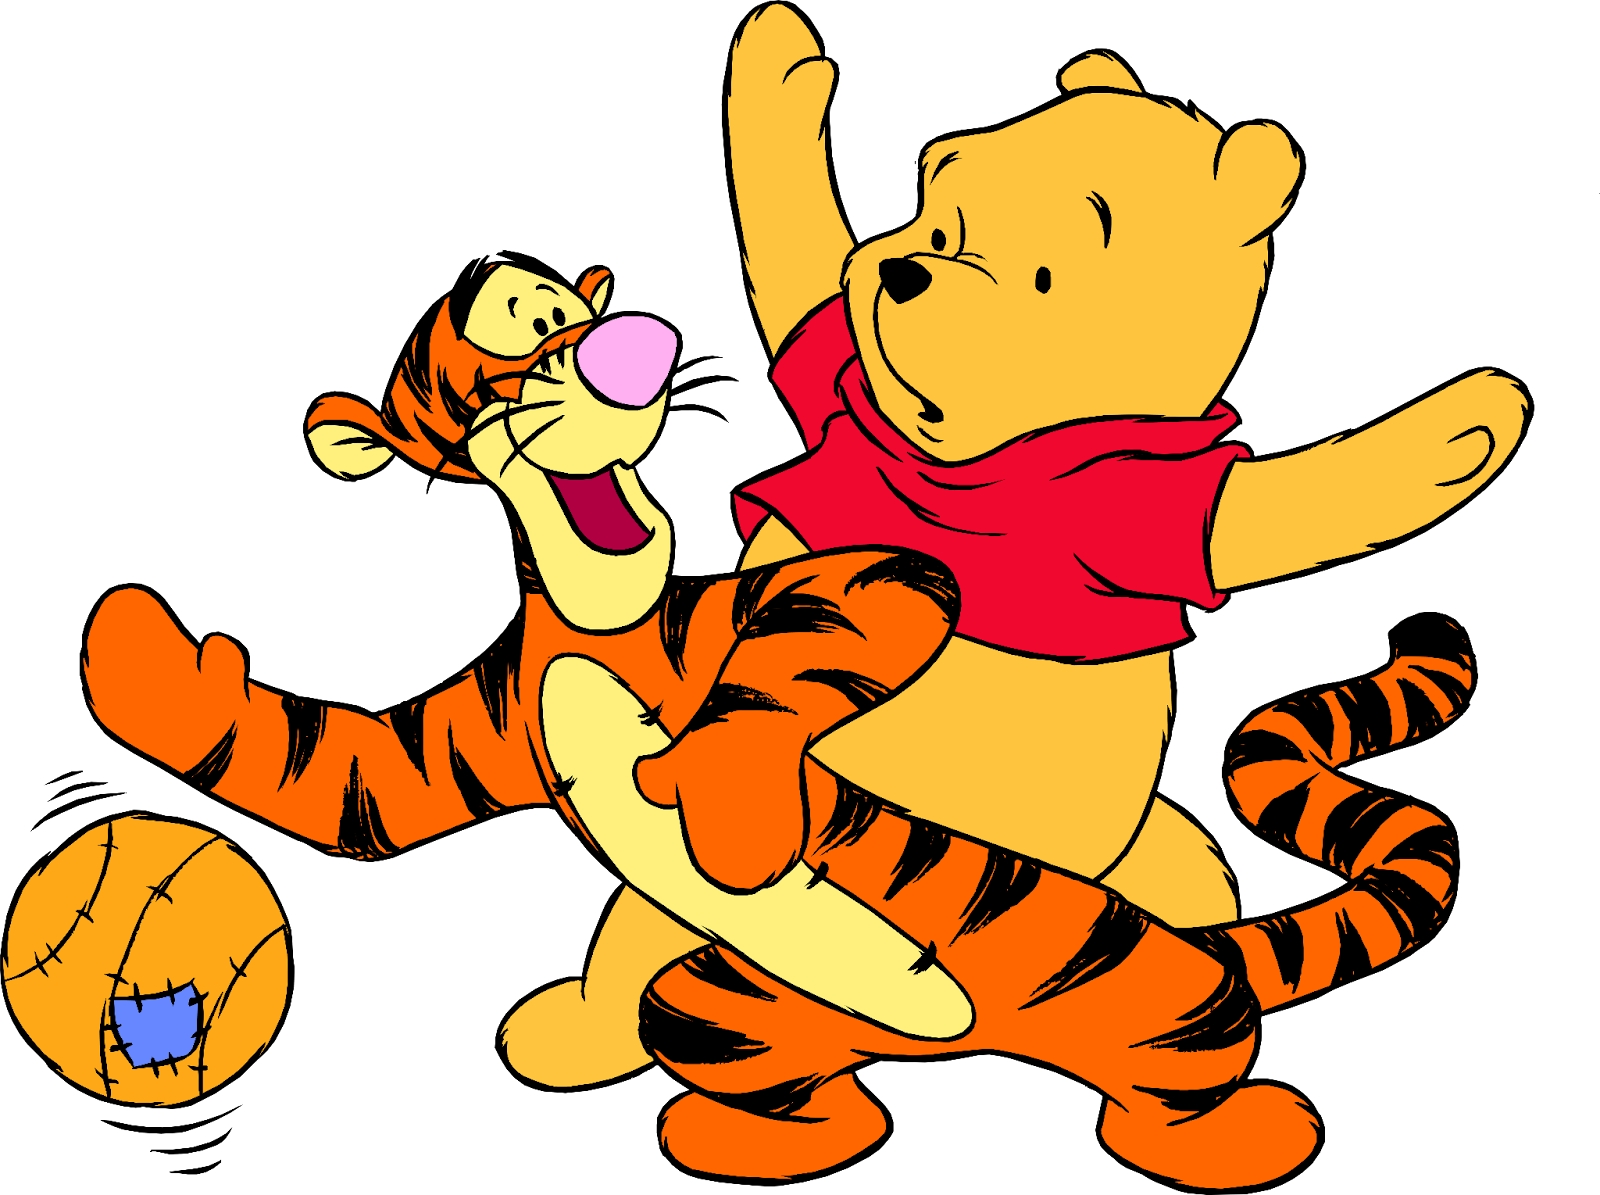 Winnie The Pooh and Tigger playing with a basketball.